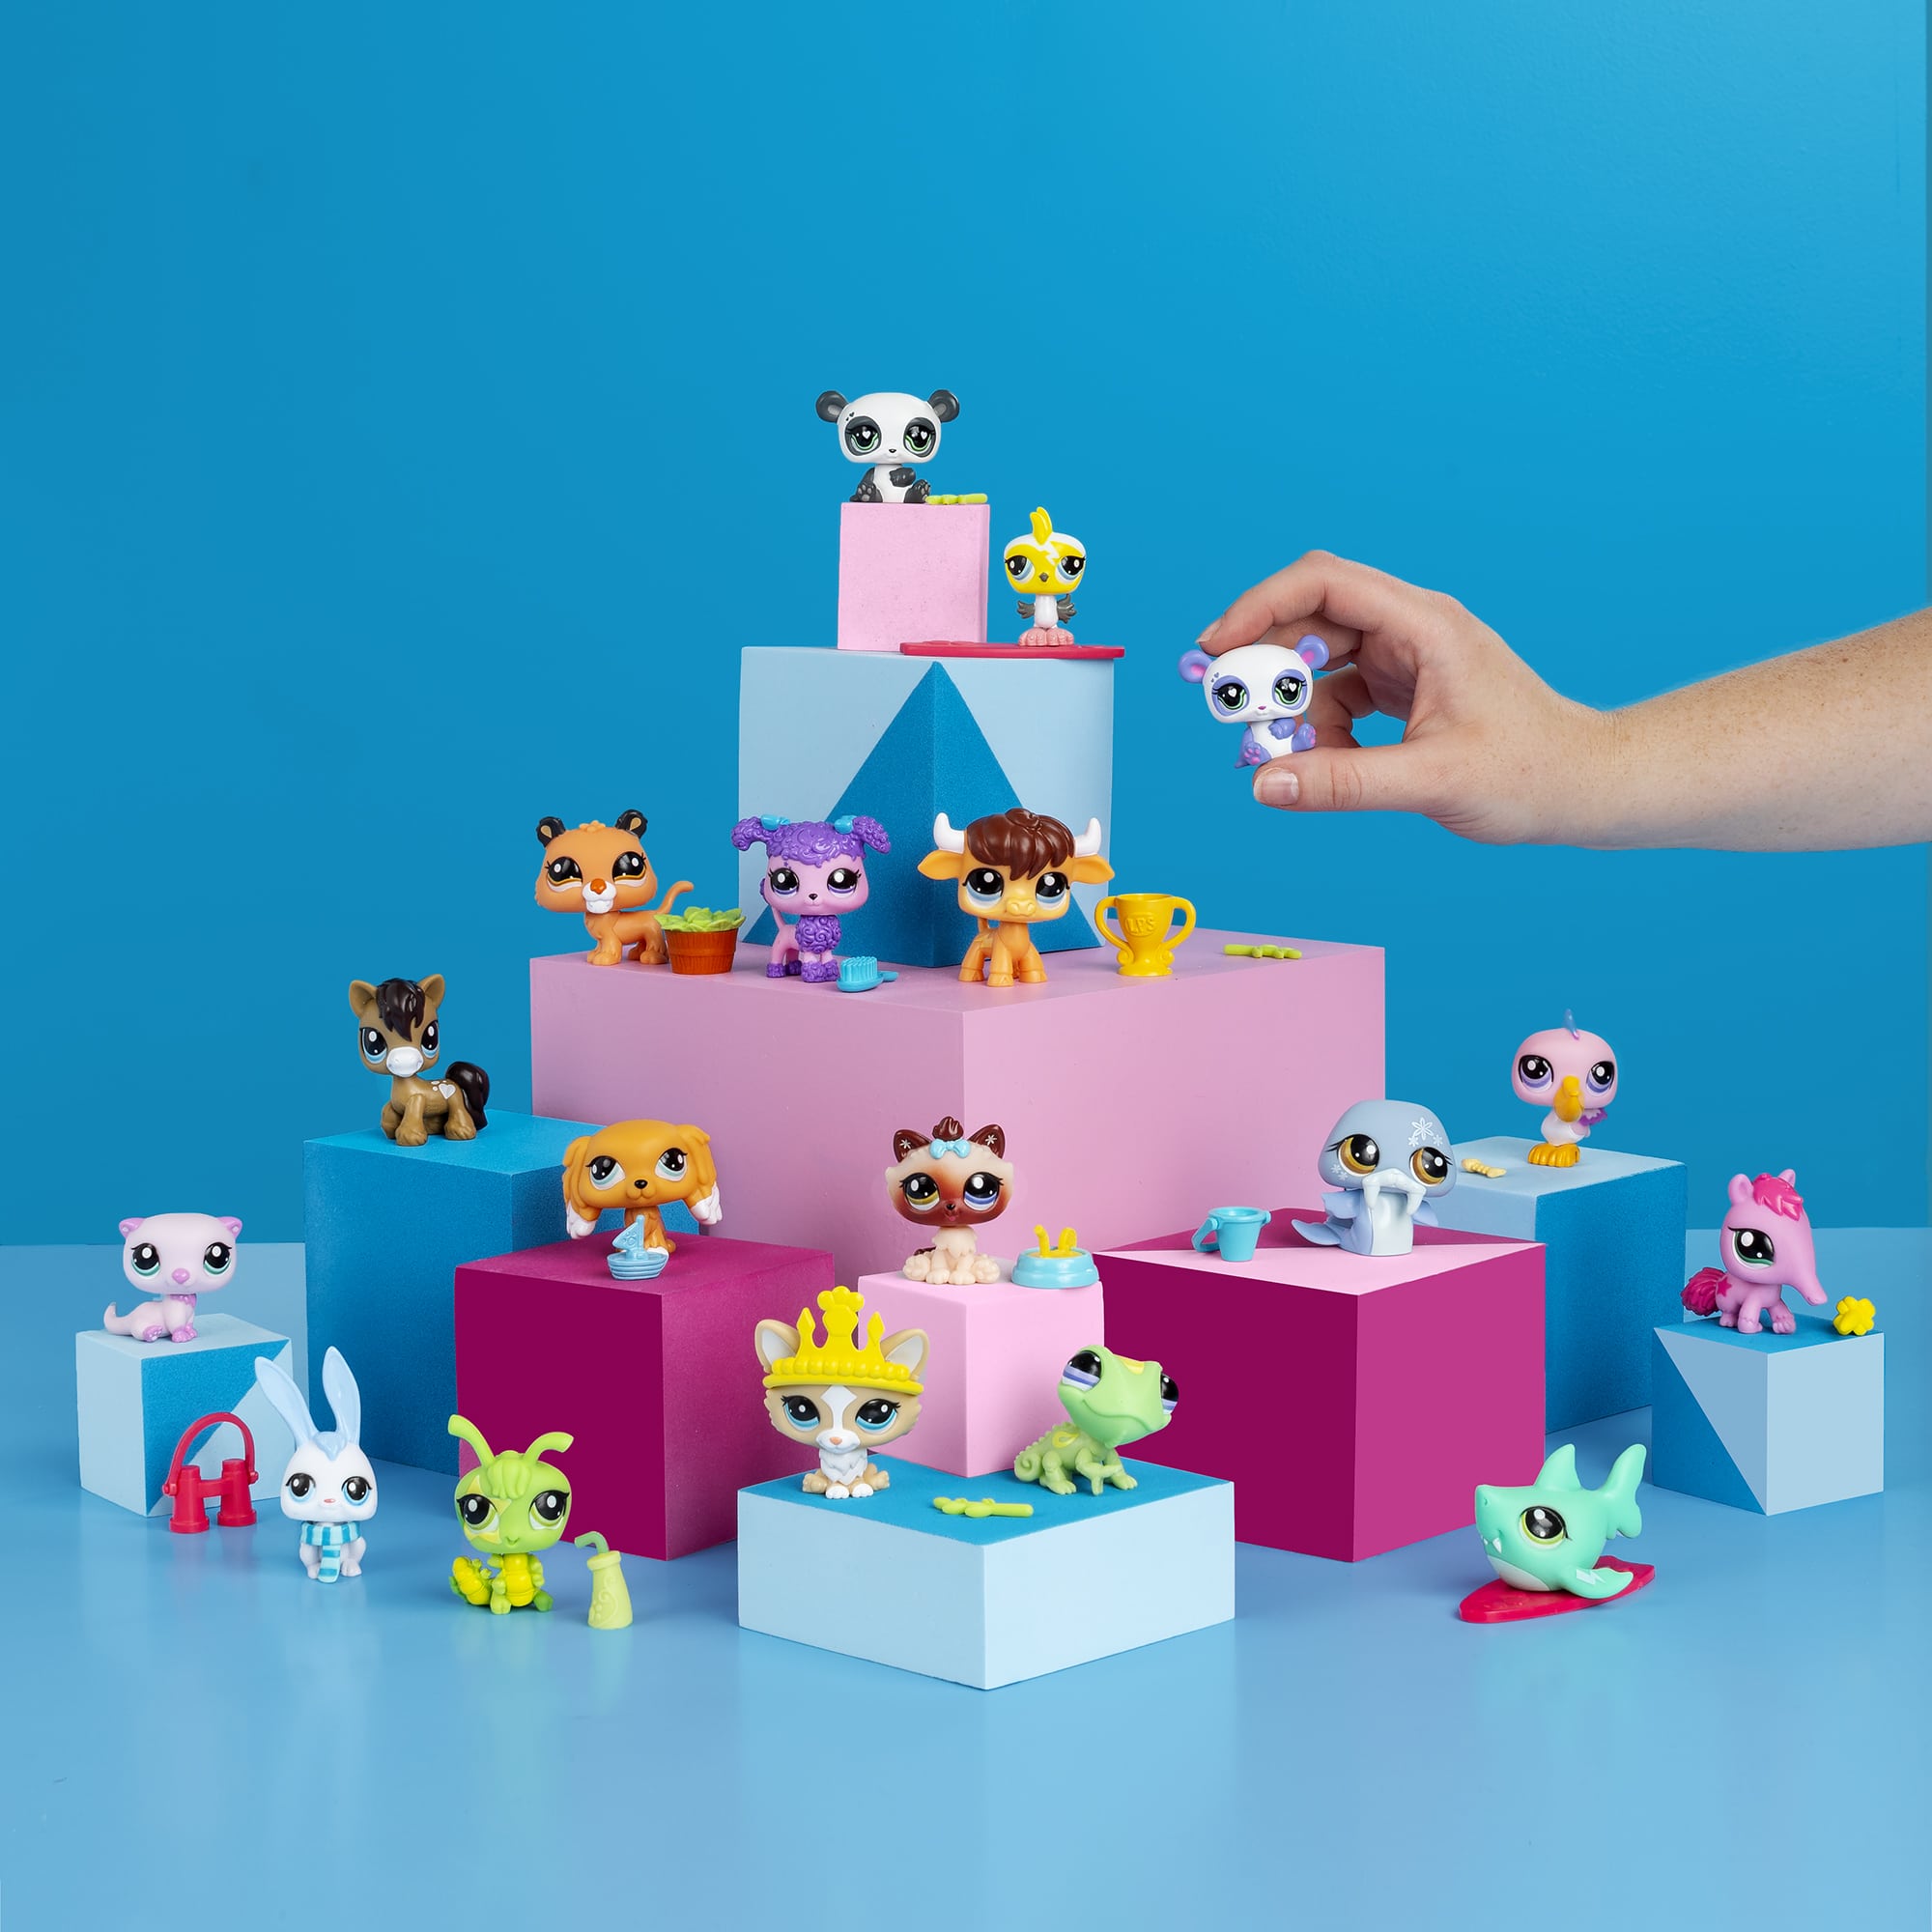 Littlest Pet Shop toys are back - new gen 7 toys from BasicFun